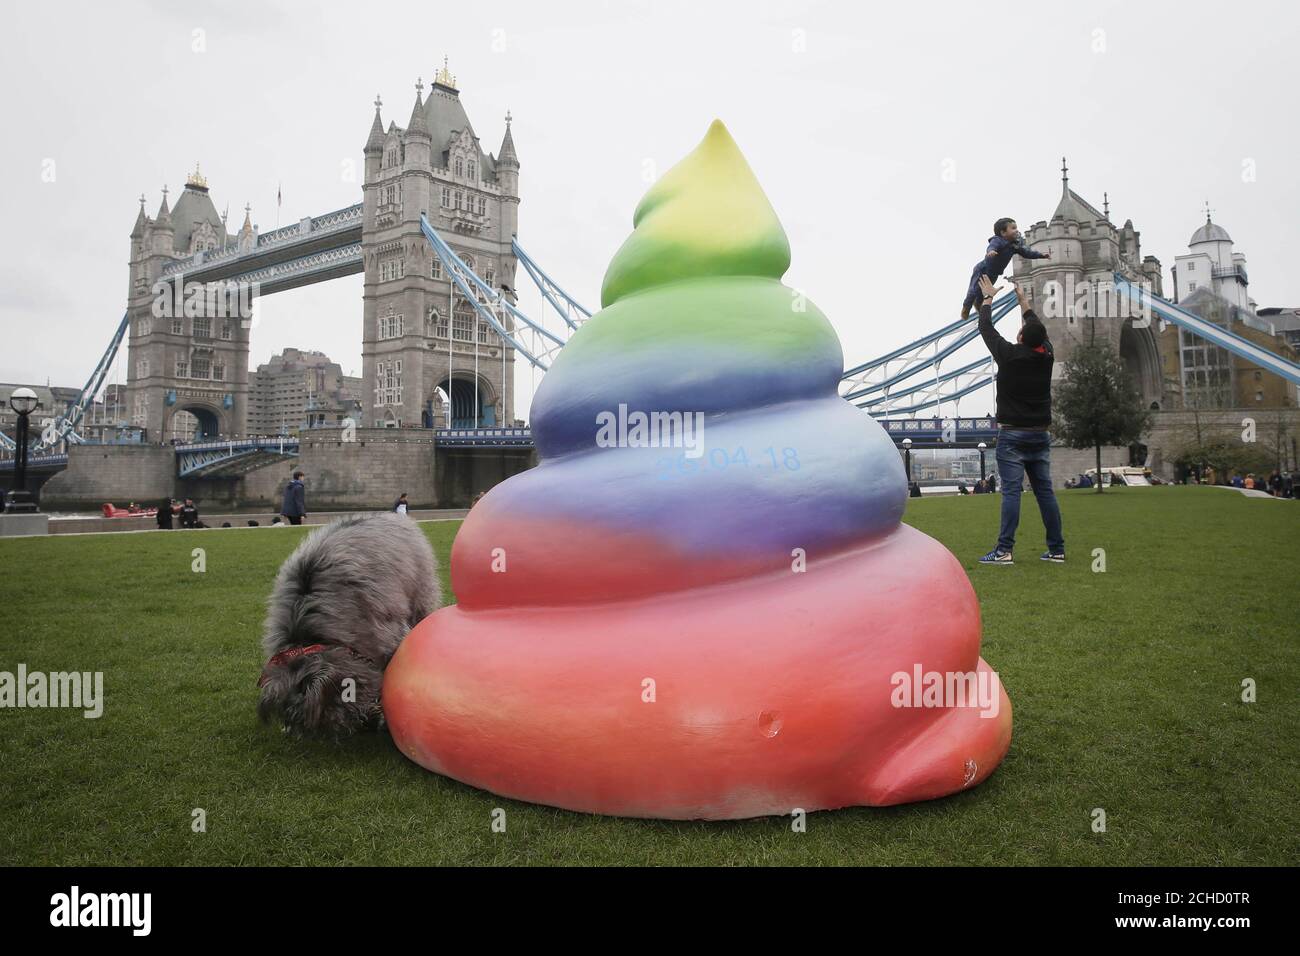 Mixed-breed rescue Ruby, interacts with a 'rainbow poo' model at Potters Fields Park in London, to announce a new service from mobile provider THREE, which launches on Thursday April 26th. Stock Photo